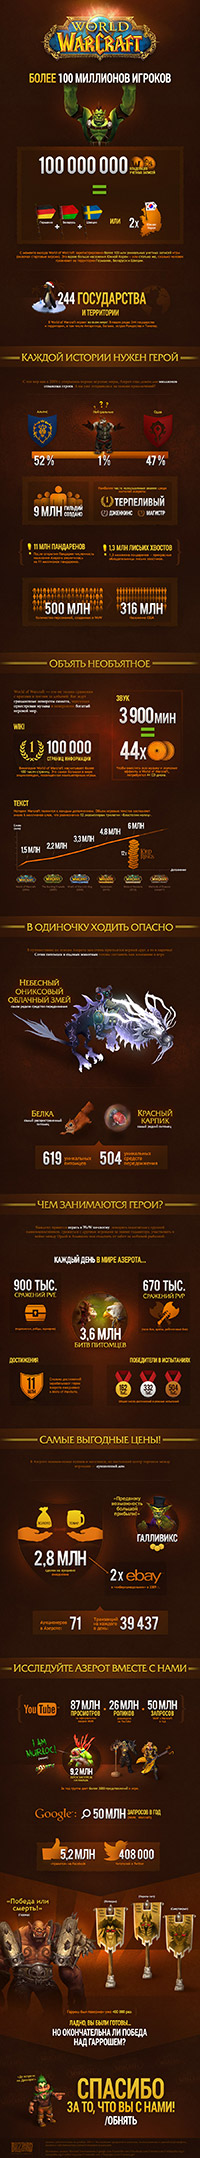 Blizzard-Infographic-Warcraft_thumb